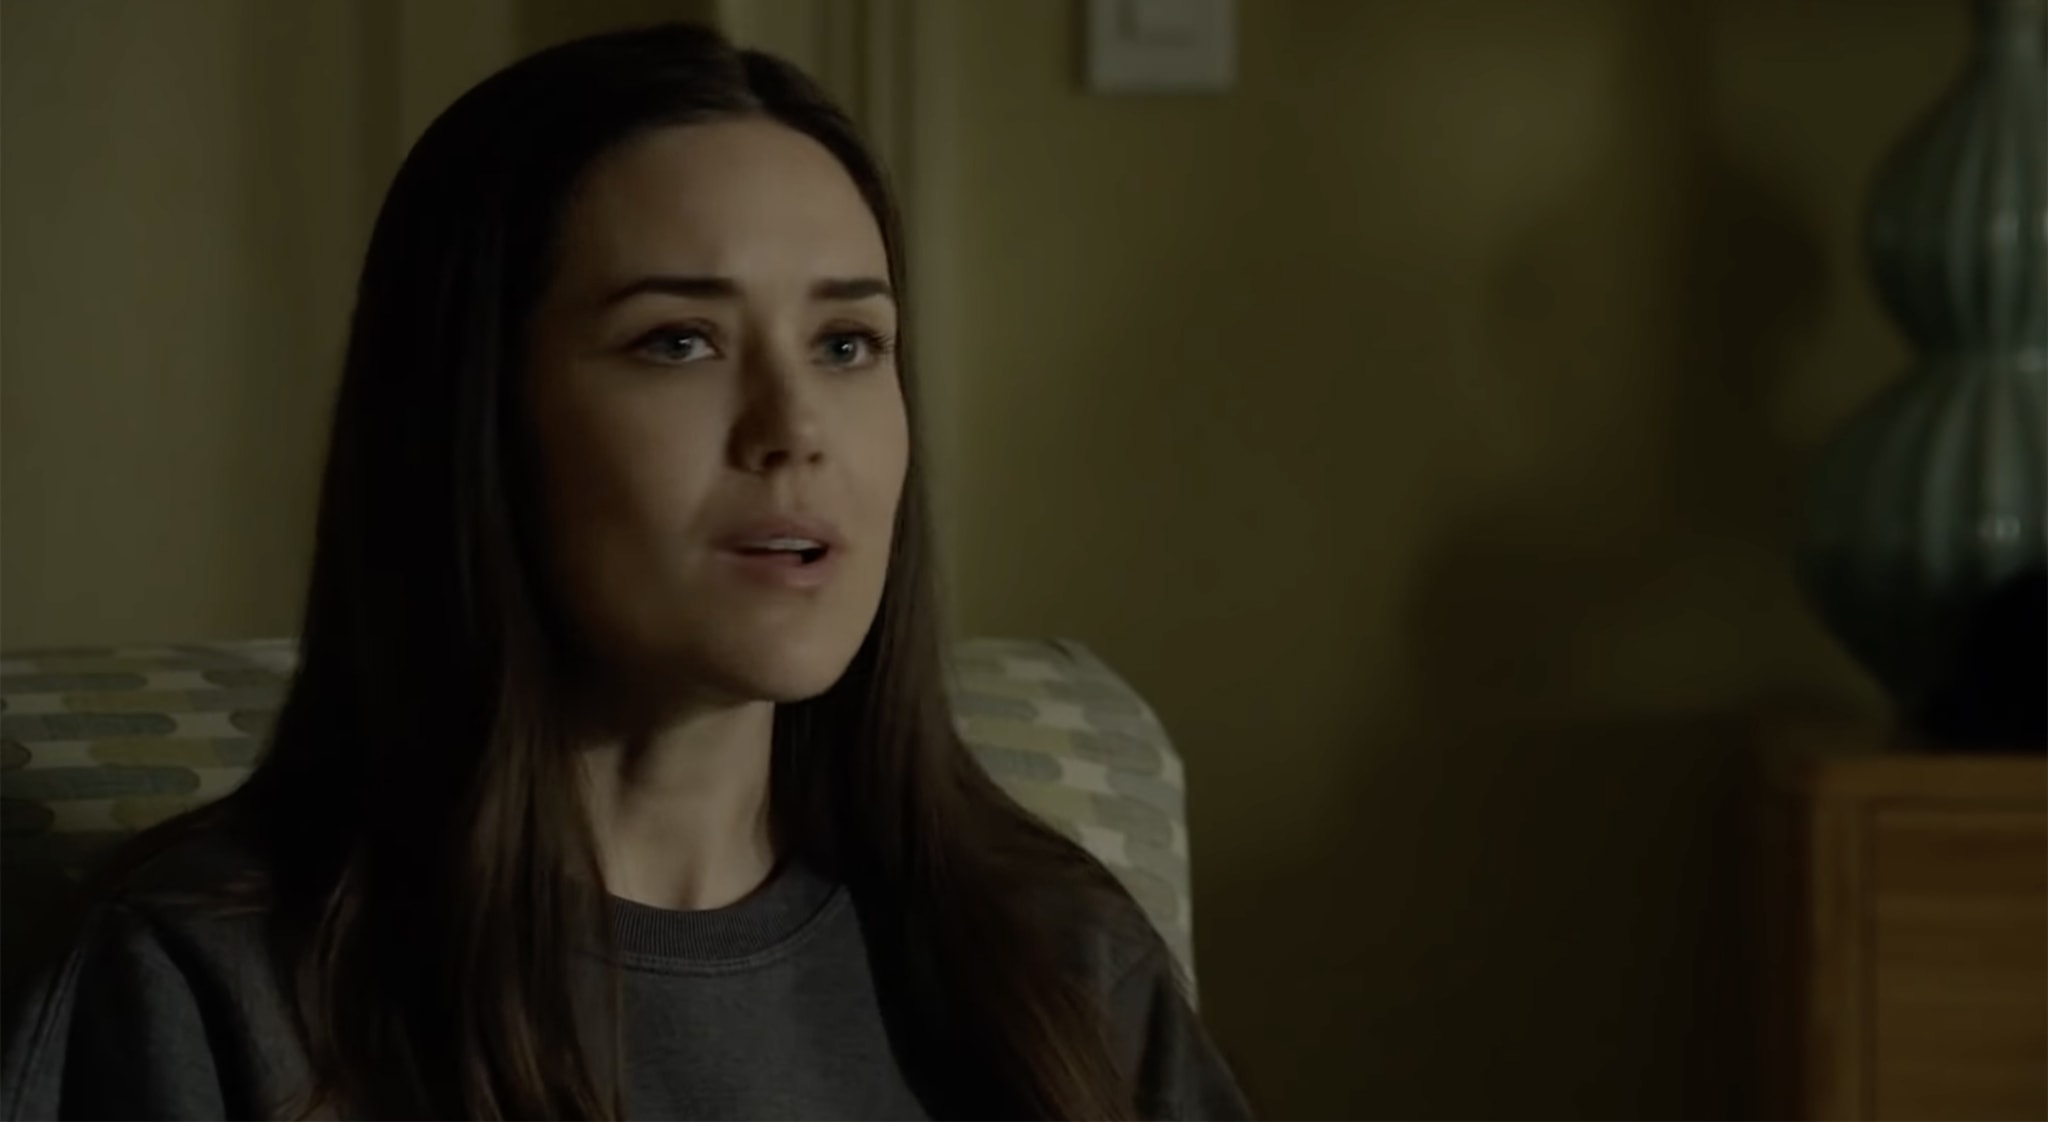 Megan Boone took a week to prepare for her audition as FBI profiler Elizabeth Keen and was called back for multiple auditions before accepting the role in March 2013